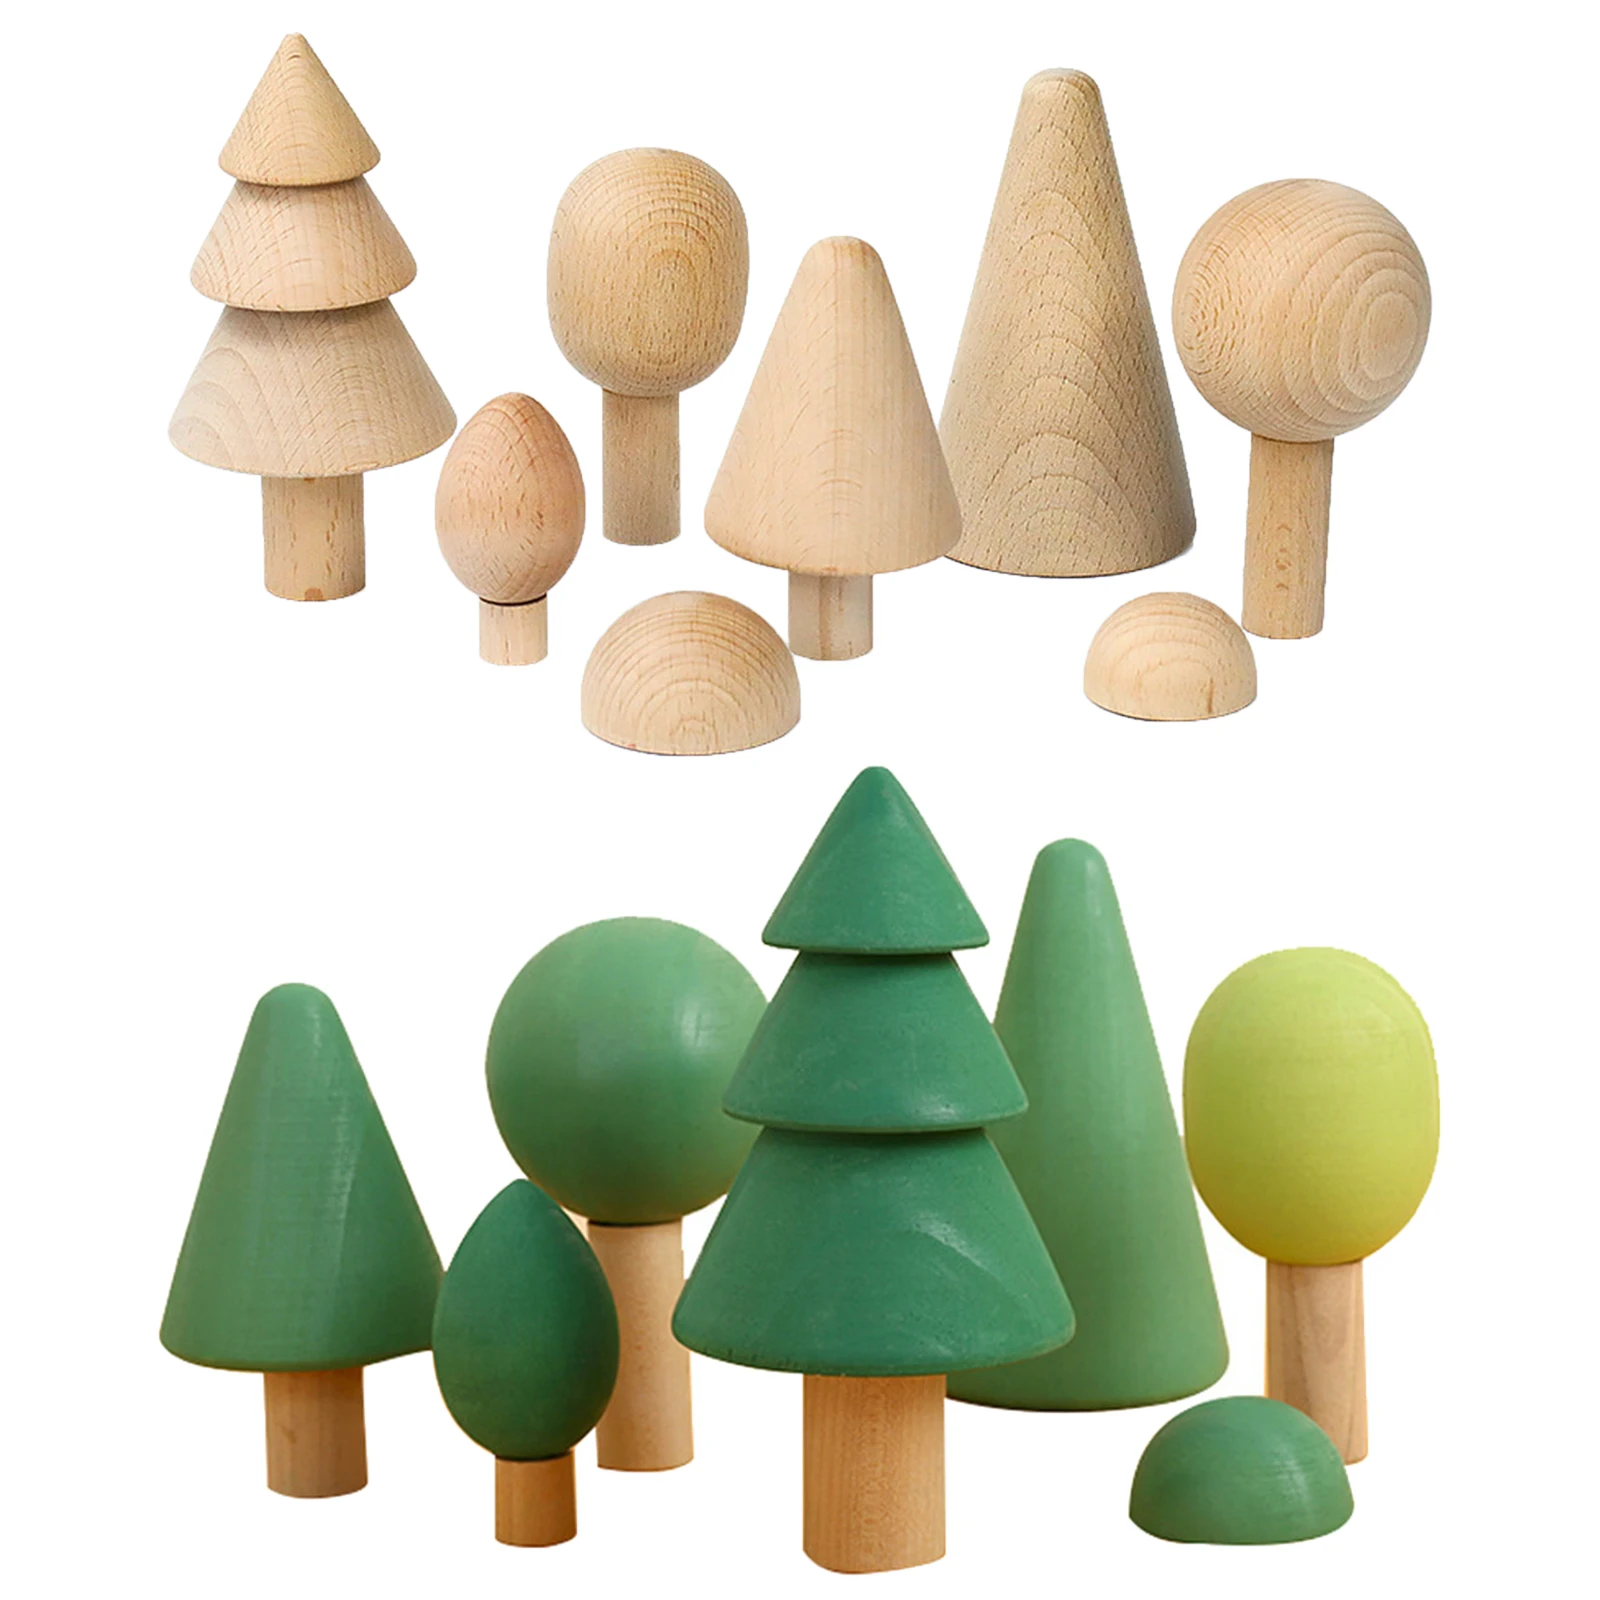 7 PCS Wood Blocks Building Tree Shape Stacker Handcrafted Fun Toy Home Decor